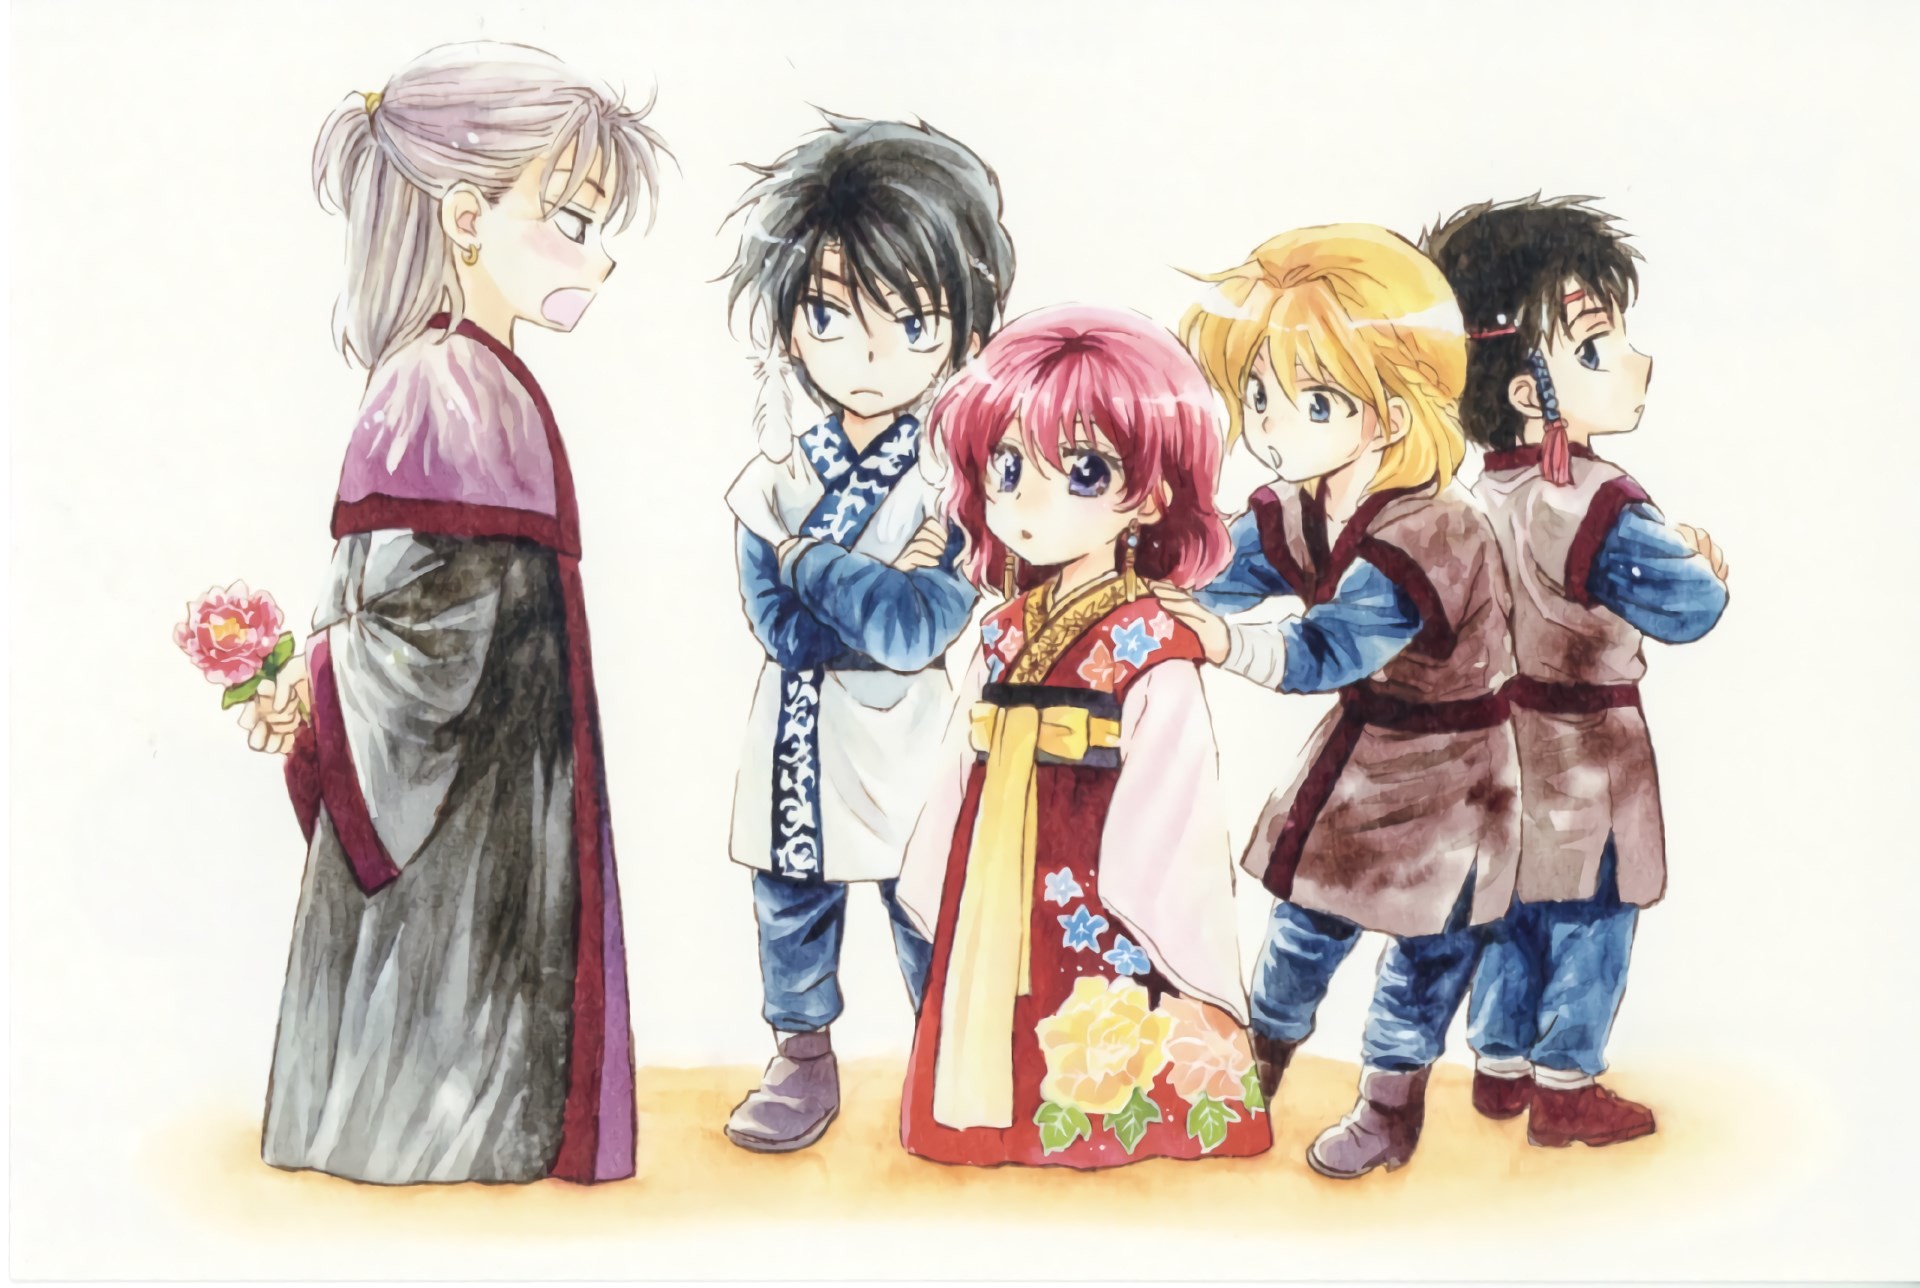 1920x1288  px computer wallpaper for yona of the dawn by Hill Jones for -  pocketfullofgrace.